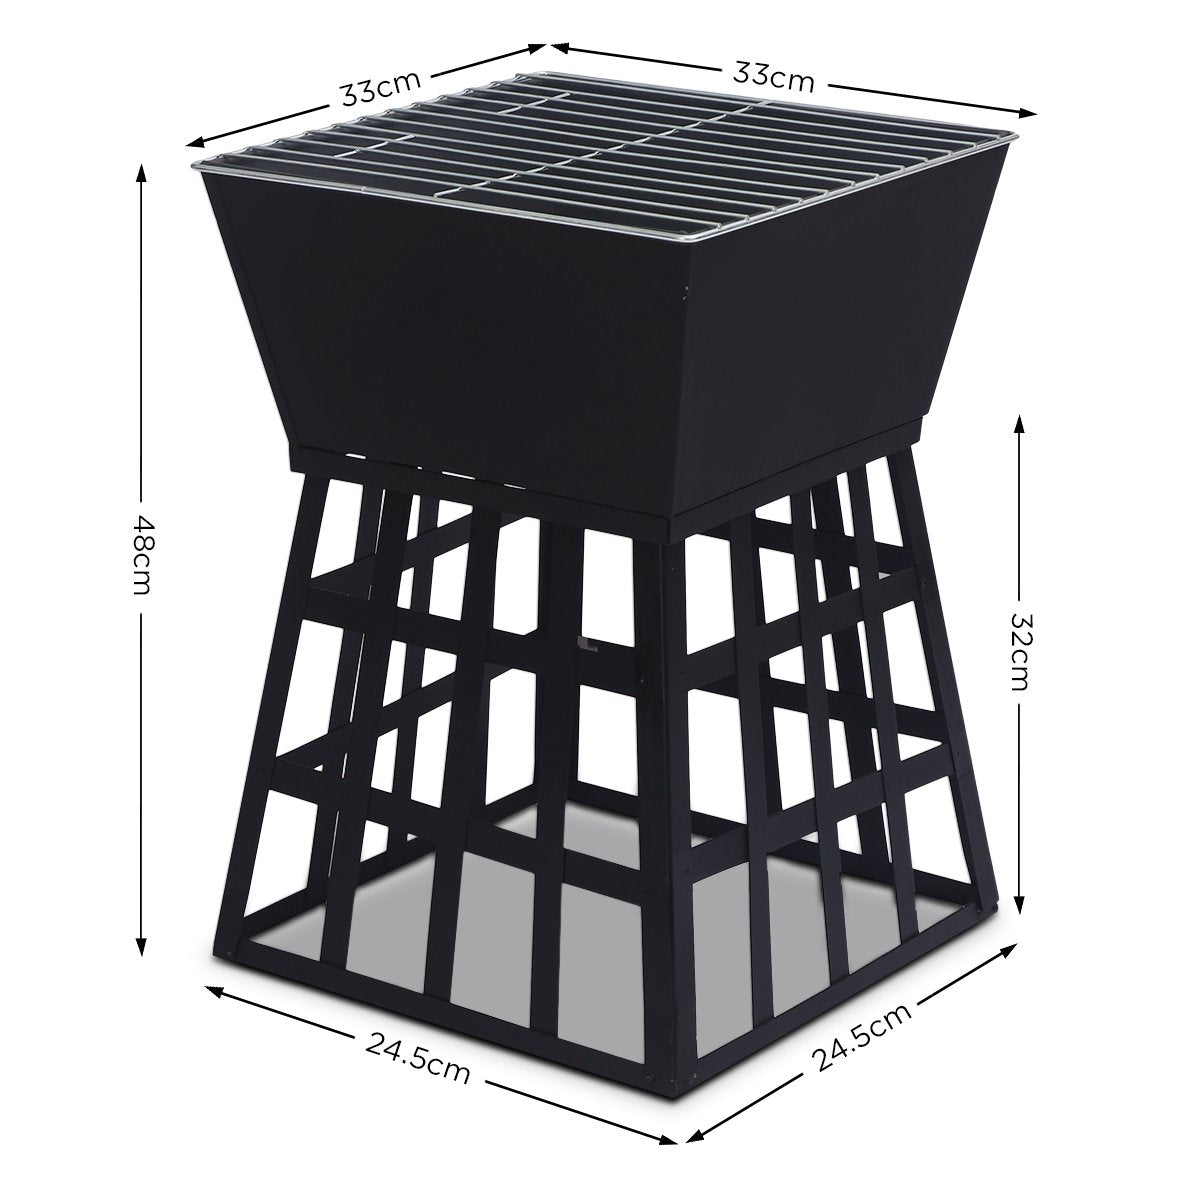 Outdoor Fire Pit for BBQ, Grilling, Cooking, Camping- Portable Brazier with Reversible Stand for Backyard